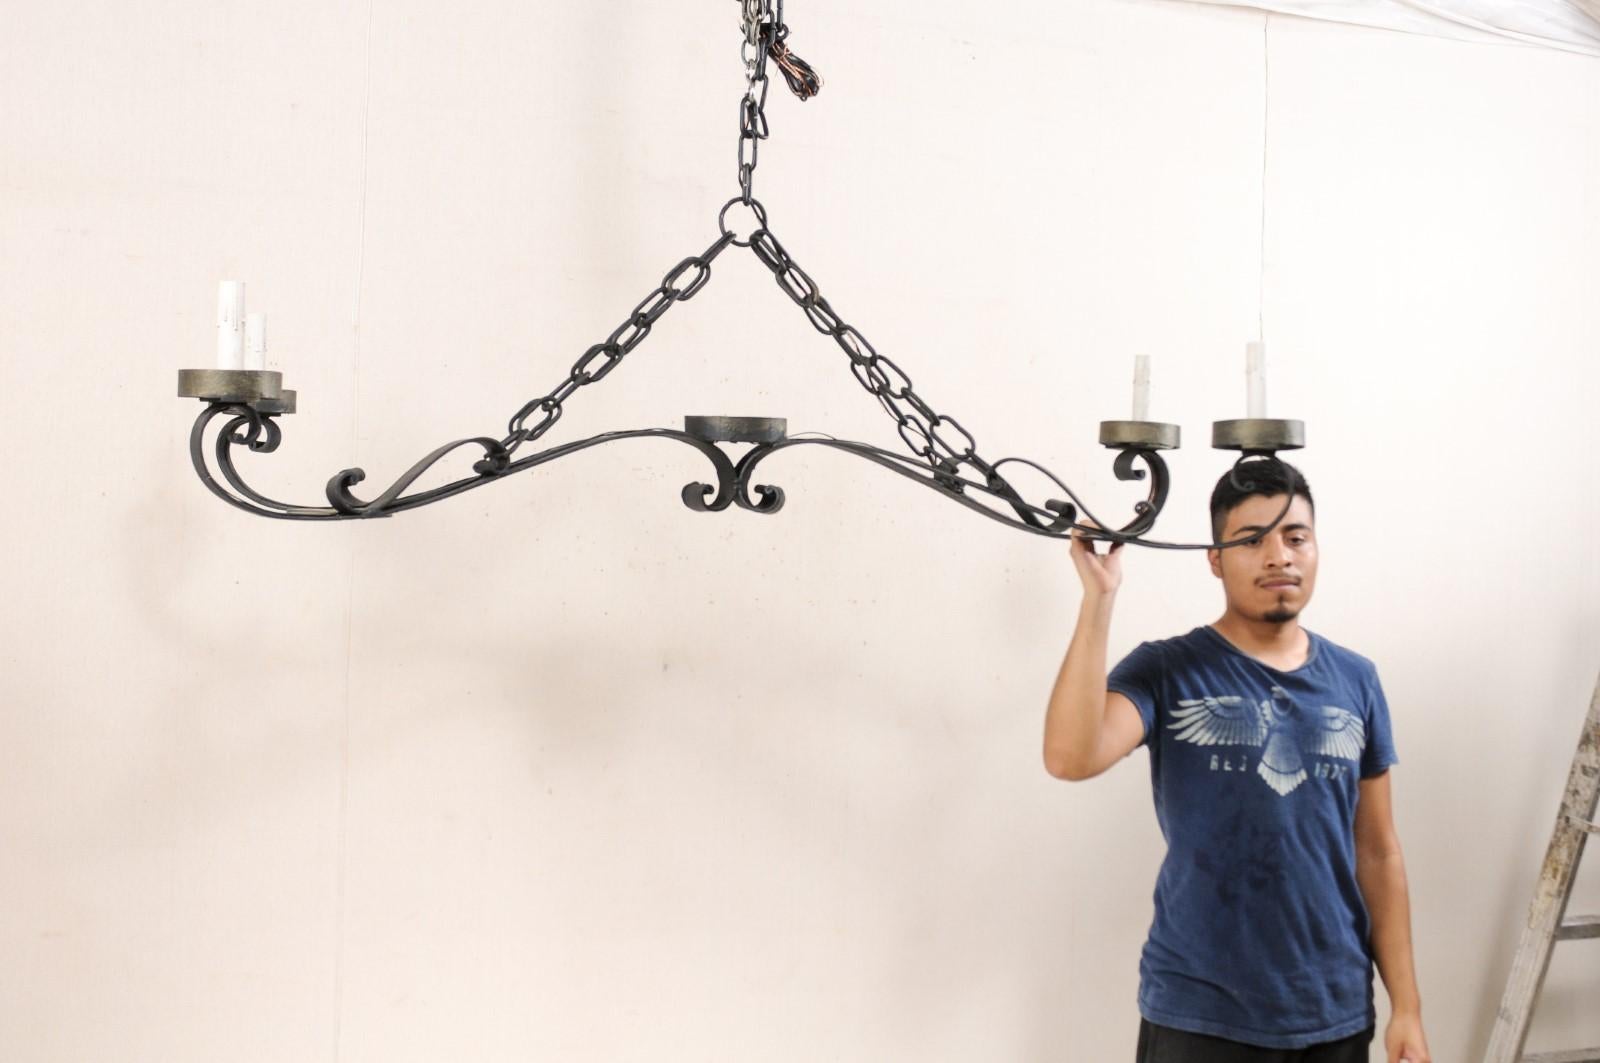 Forged An Elegant French Wrought Iron Chandelier a Great Large Size of 5+ Ft in Length!